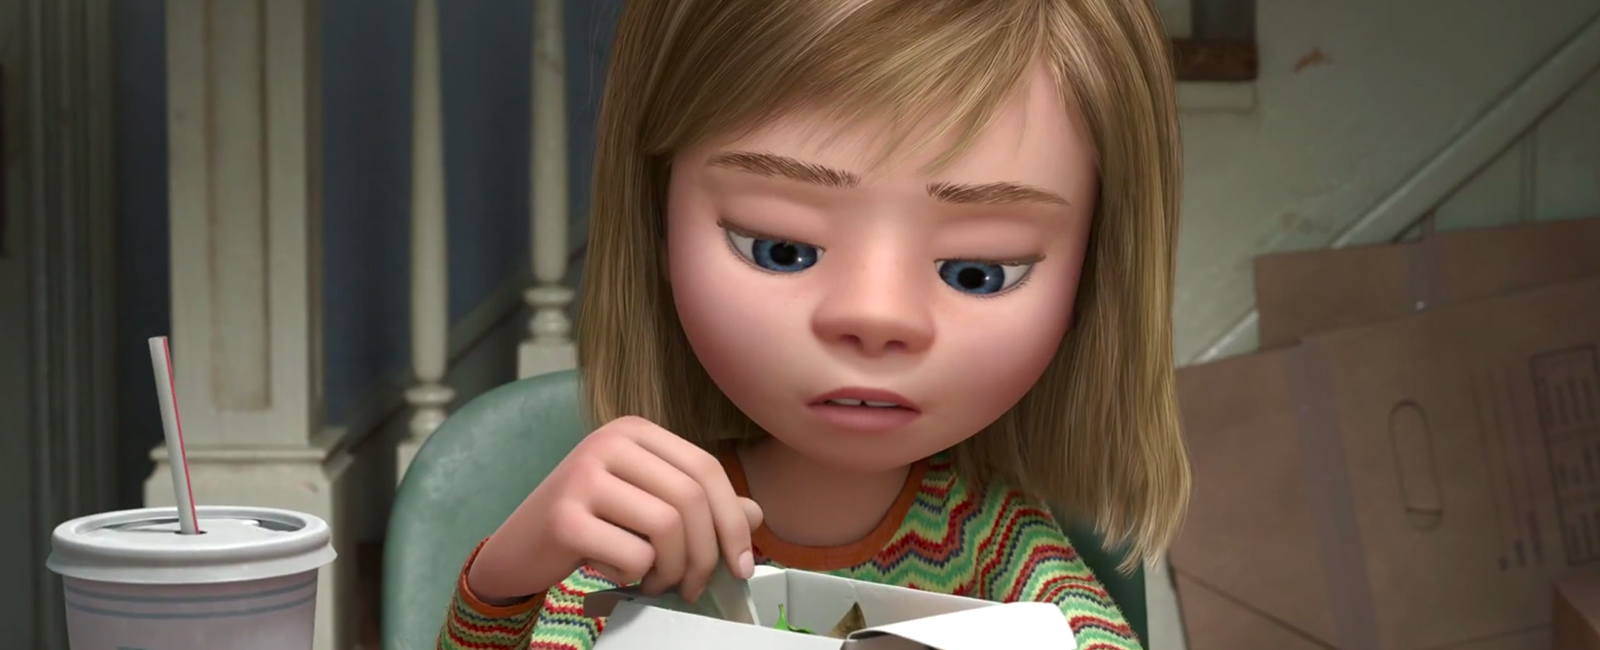 First Trailer for Pixar’s Inside Out